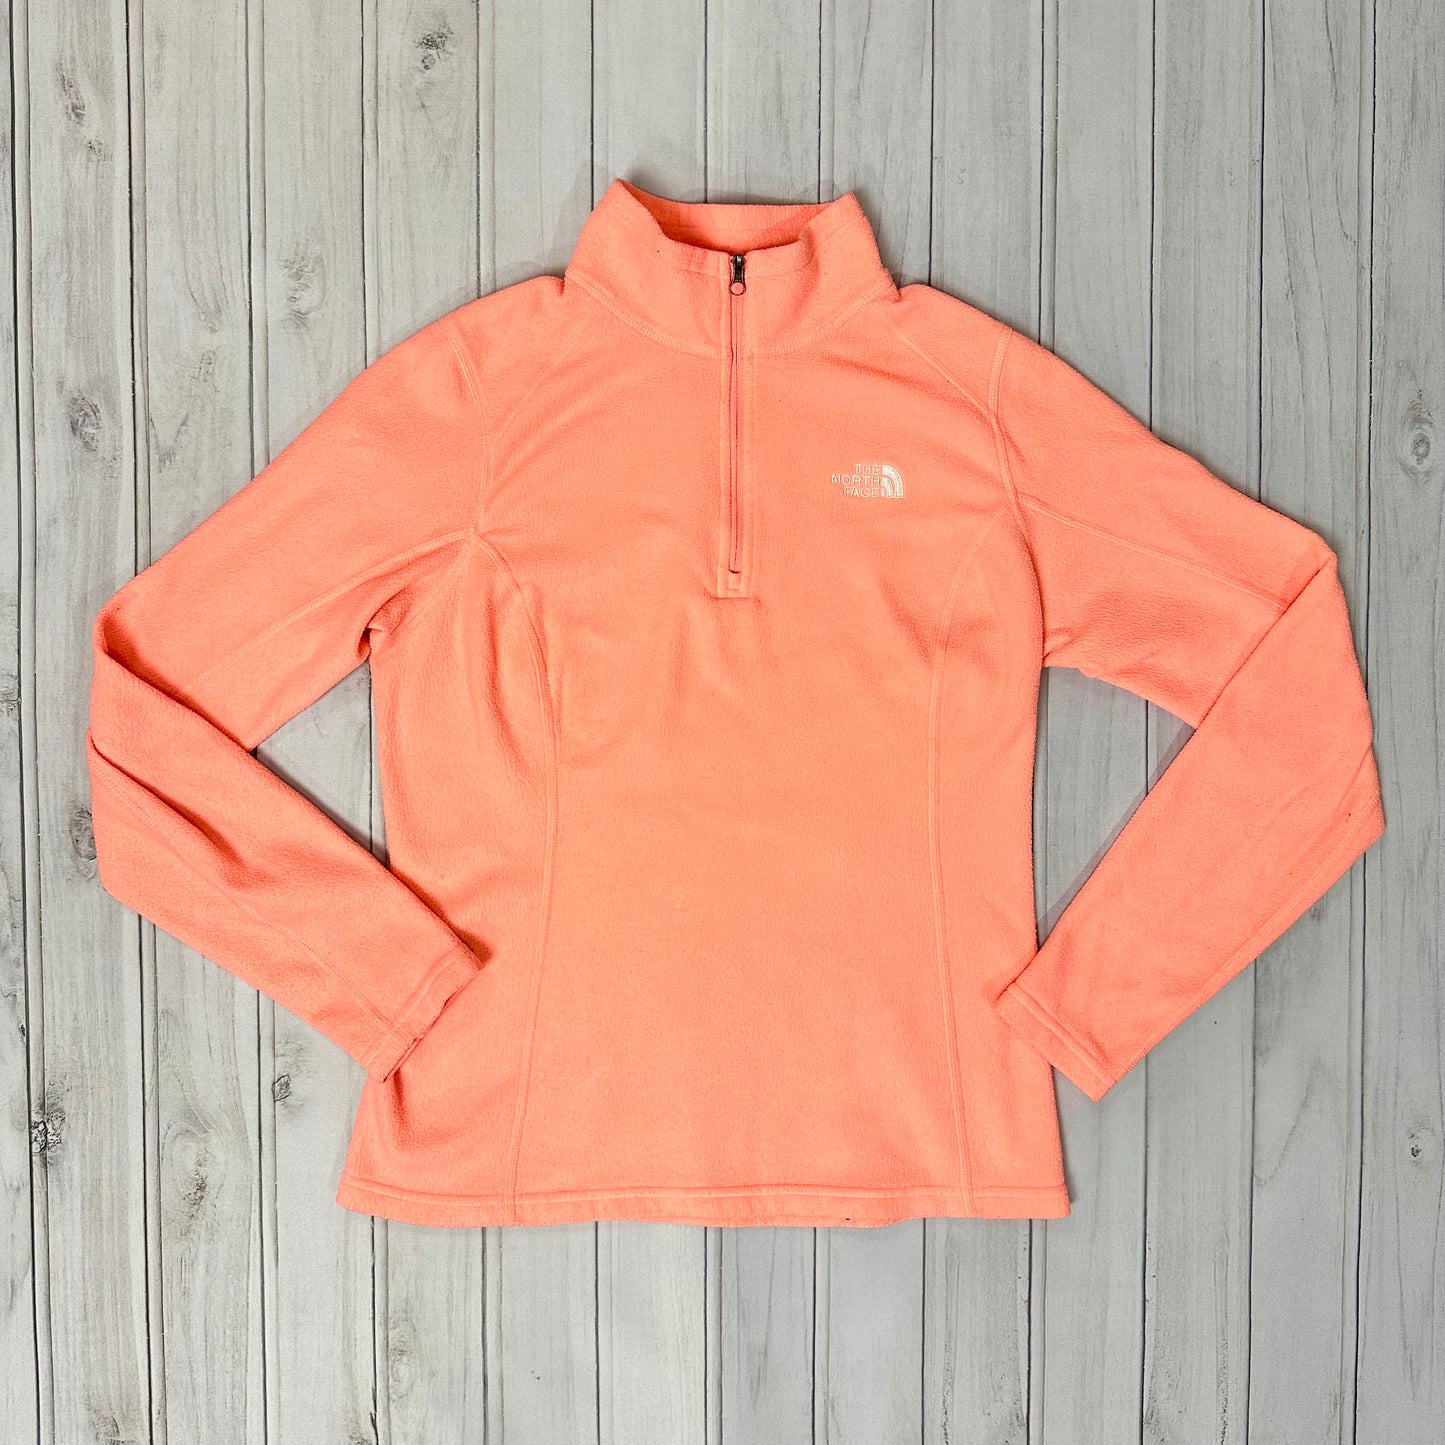 Athletic Top Long Sleeve Collar By North Face  Size: S